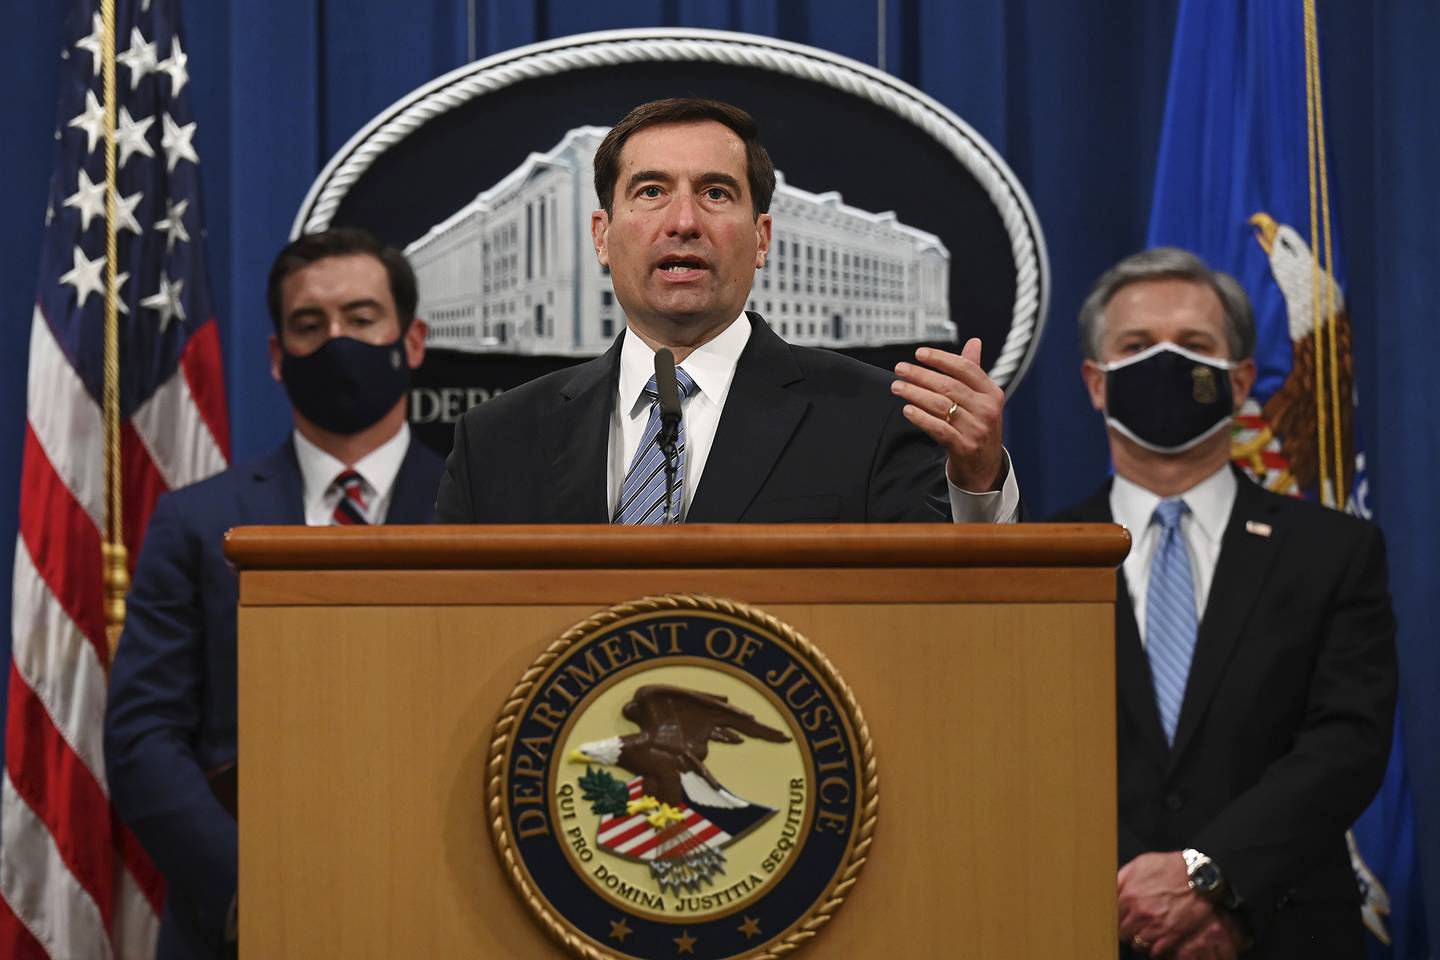 Assistant Attorney General of the National Security Division John Demers speaks during a press conference at the Department of Justice, Wednesday,  Oct. 7, 2020, in Washington.